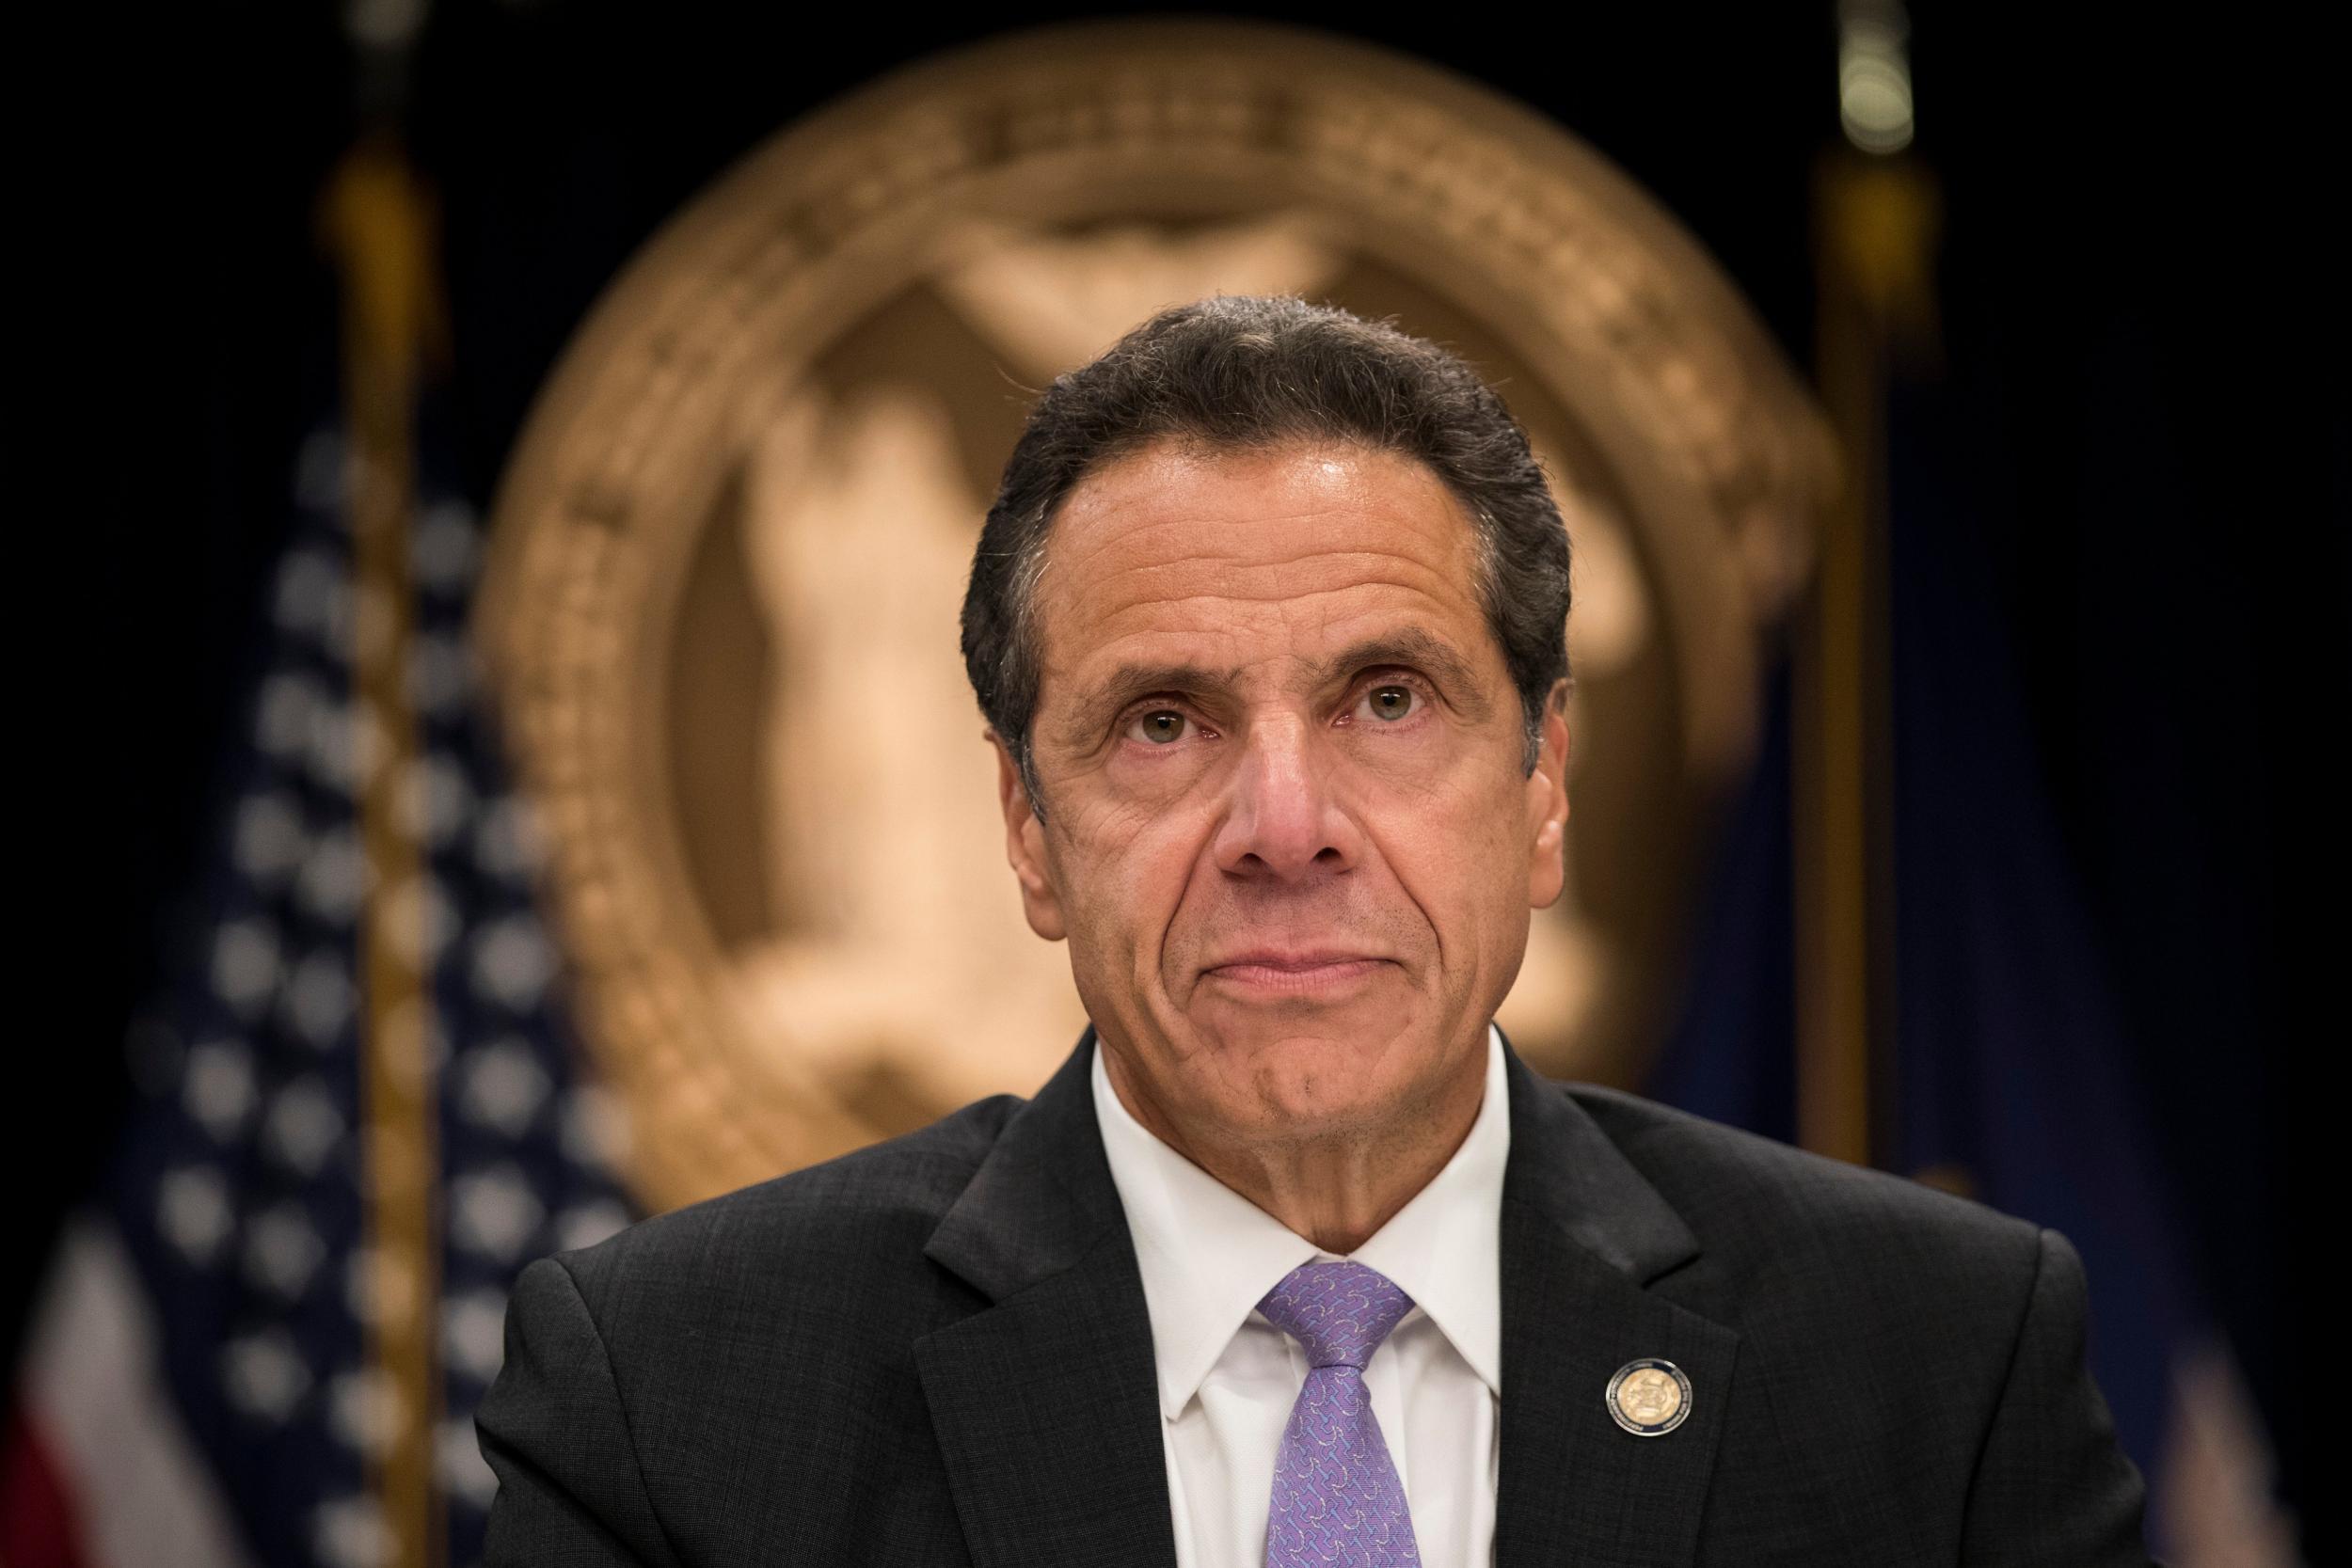 Three women have accused the New York governor of sexual harassment